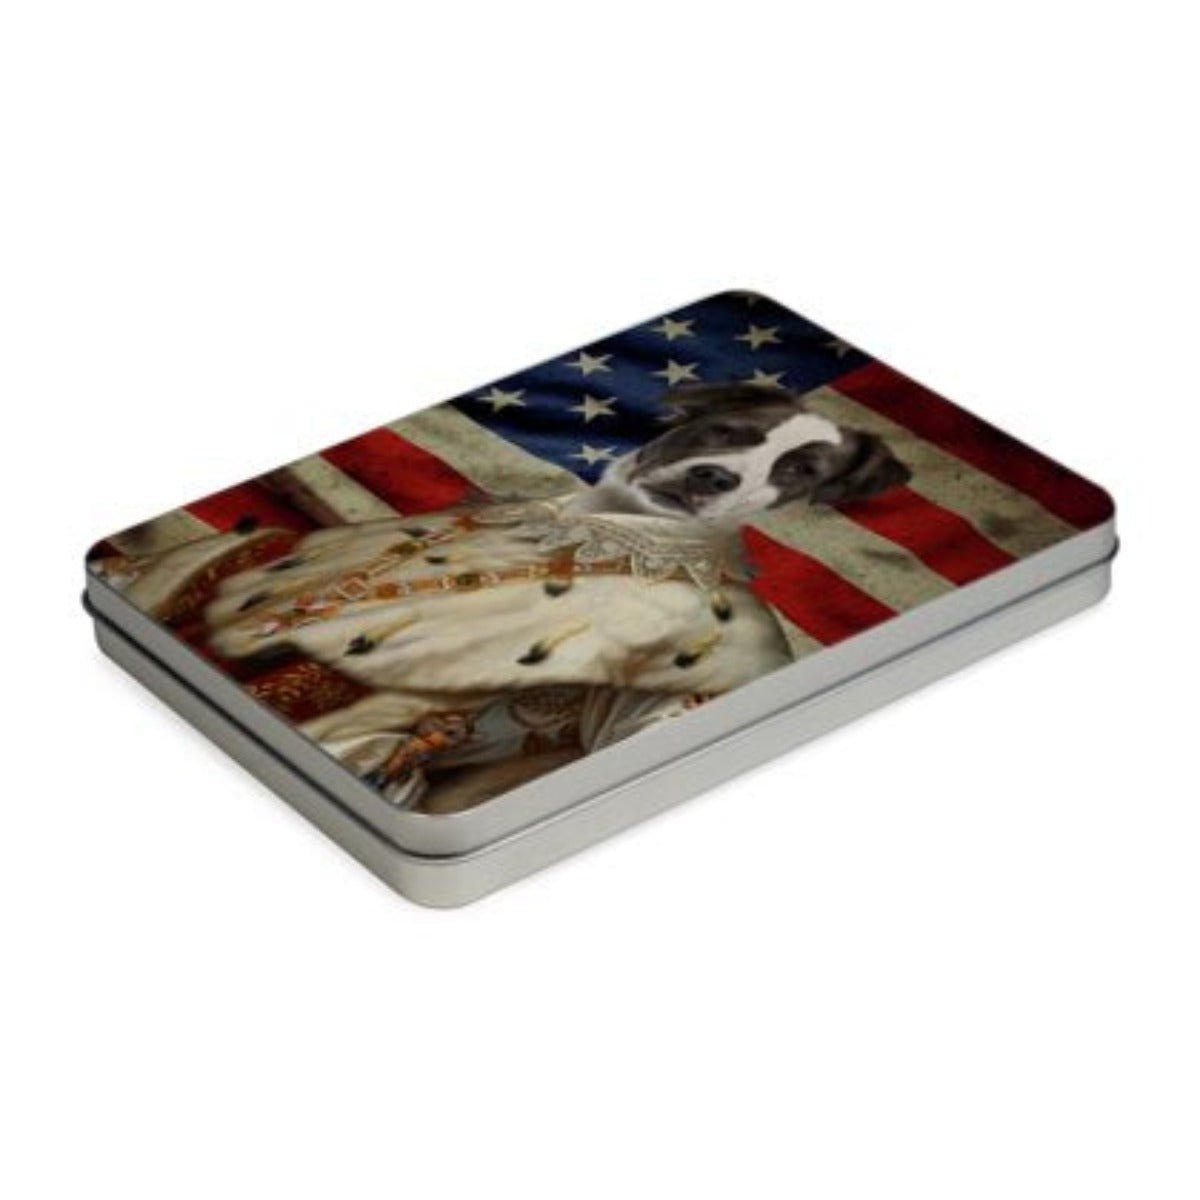 His Majesty USA Flag: Custom Pet Puzzle - Paw & Glory - #pet portraits# - #dog portraits# - #pet portraits uk#paw & glory, custom pet portrait Puzzle,turn your dog into a painting, pet portrait in uniform, dog portrait picture, admiral dog, pictures of your dog